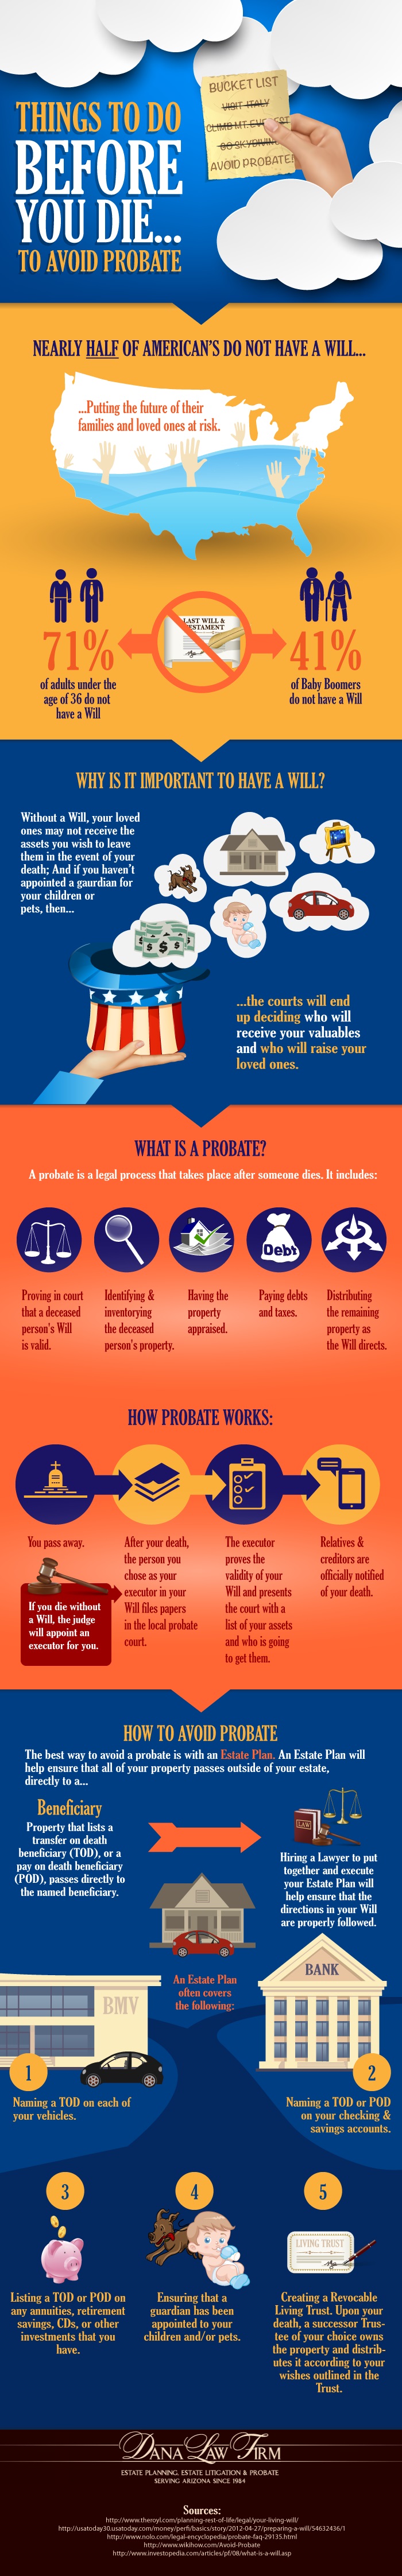 Things To Do Before You Die To Avoid Probate